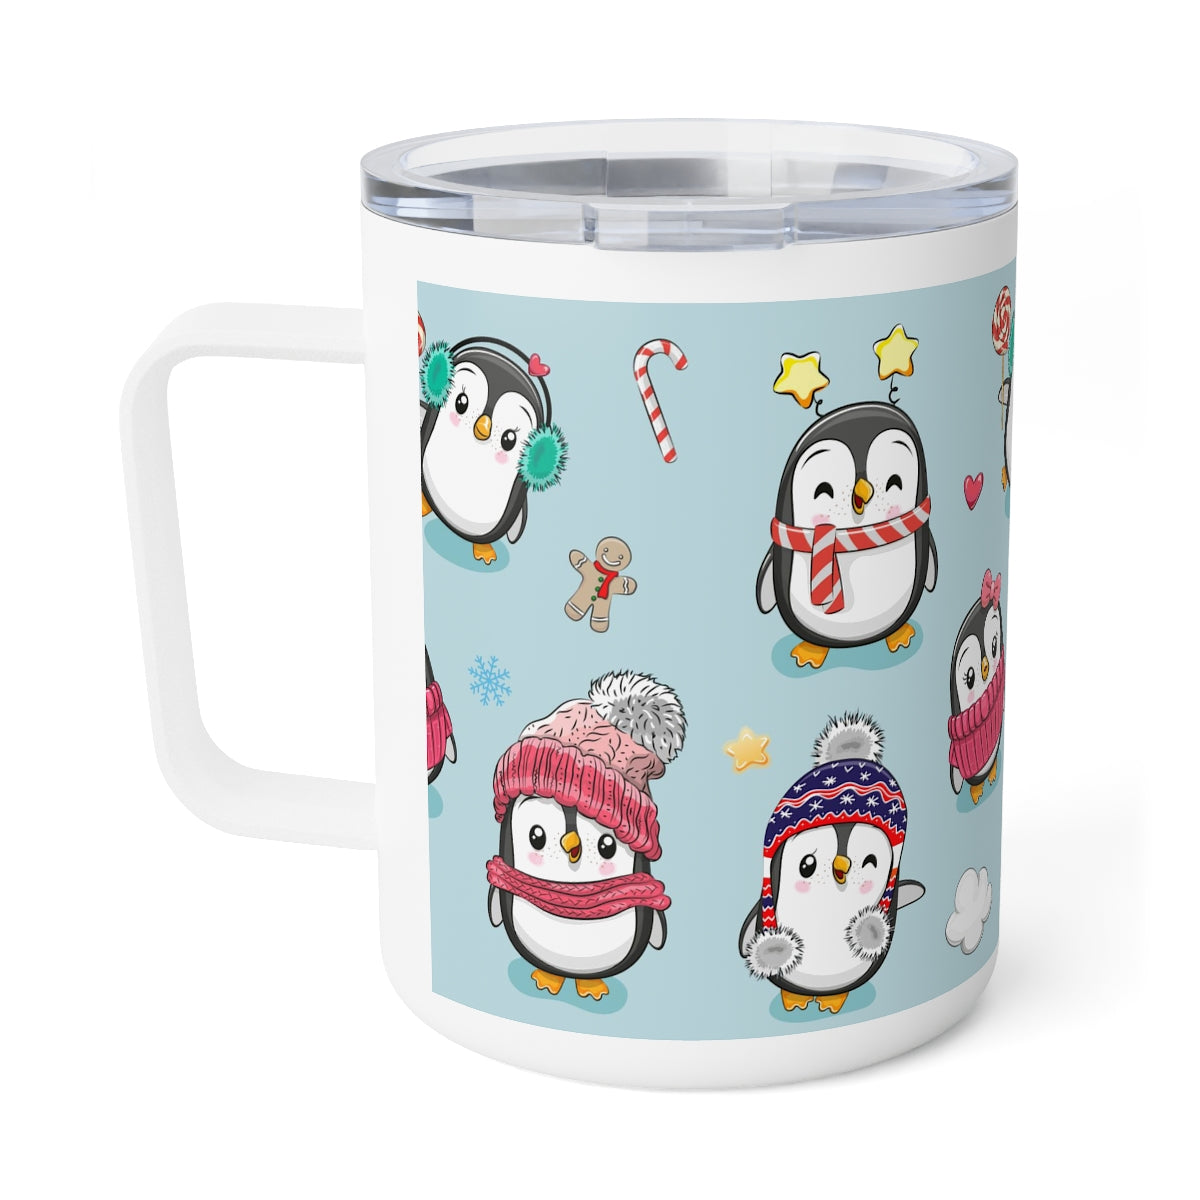 Penguins in Winter Clothes Insulated Coffee Mug, 10oz